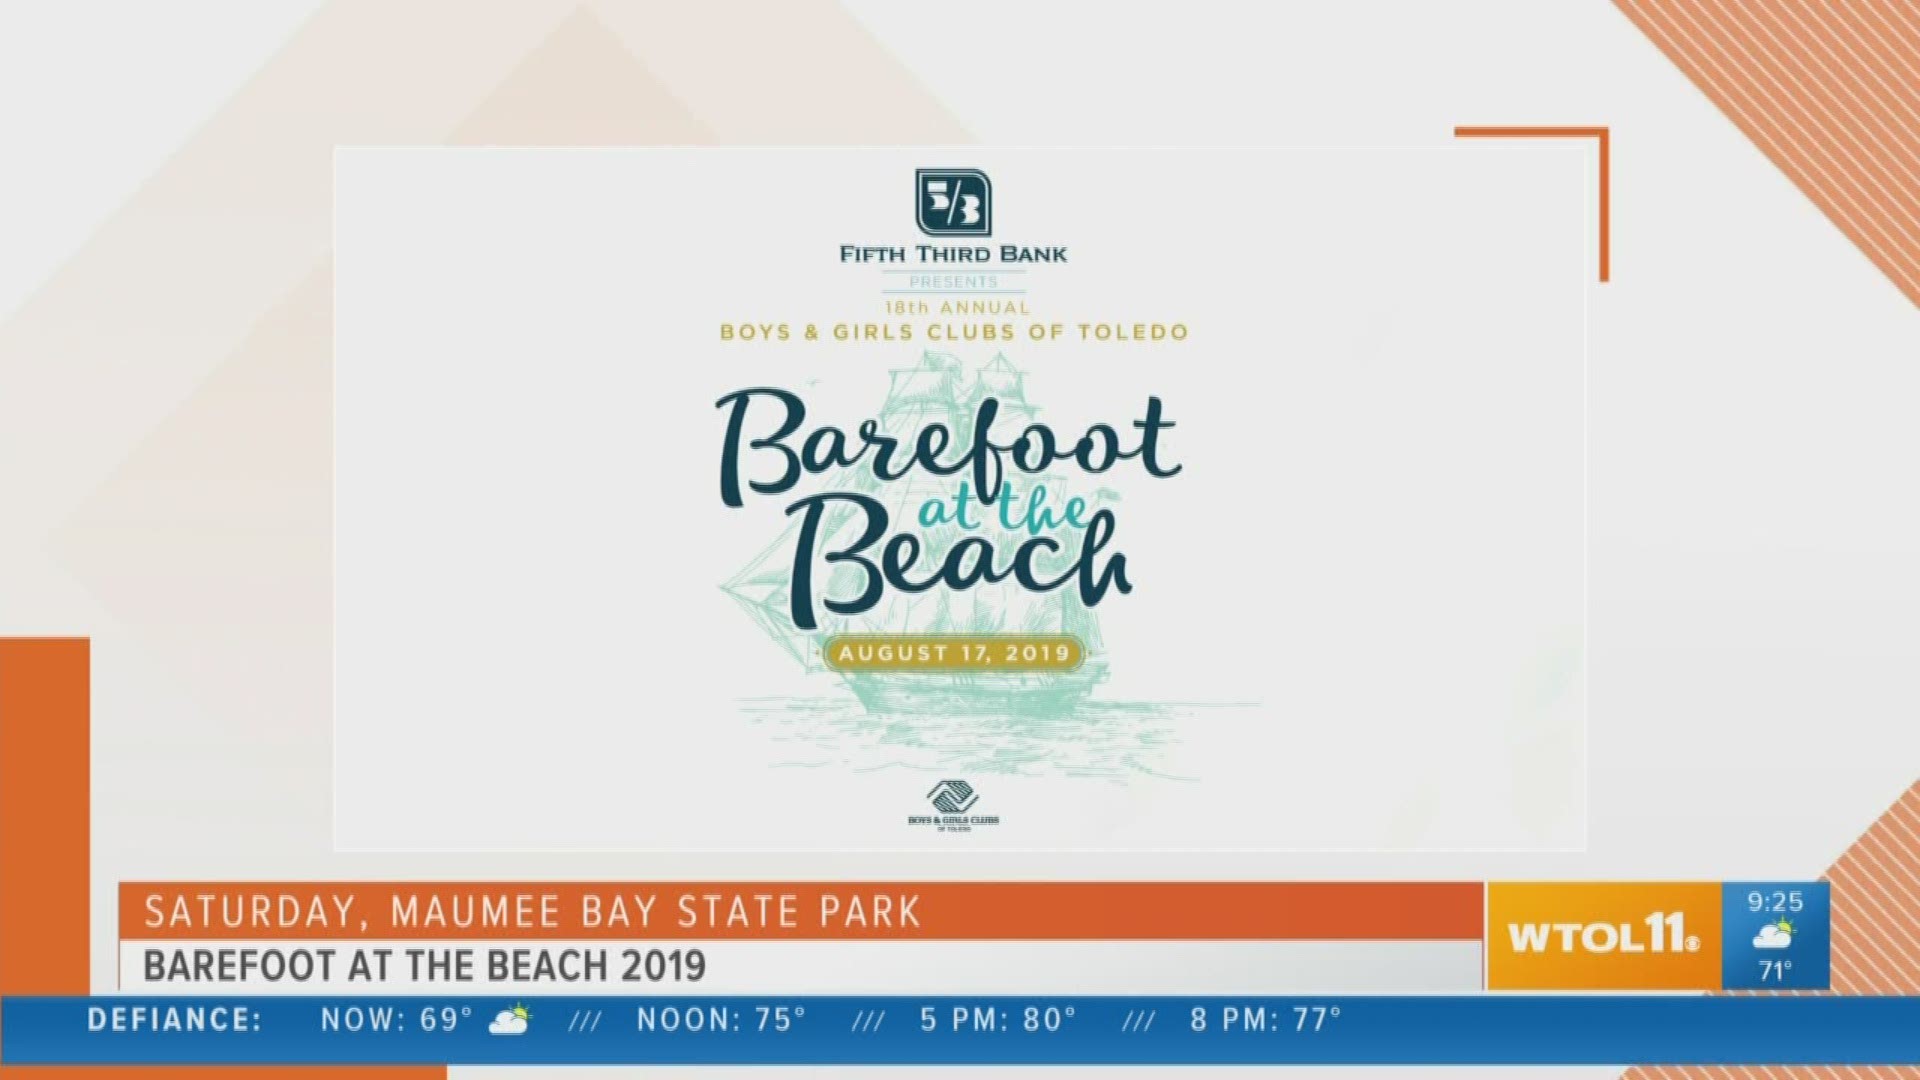 Here's how you can still get your tickets for Barefoot at the Beach this weekend, benefiting the Boys and Girls clubs of Toledo!